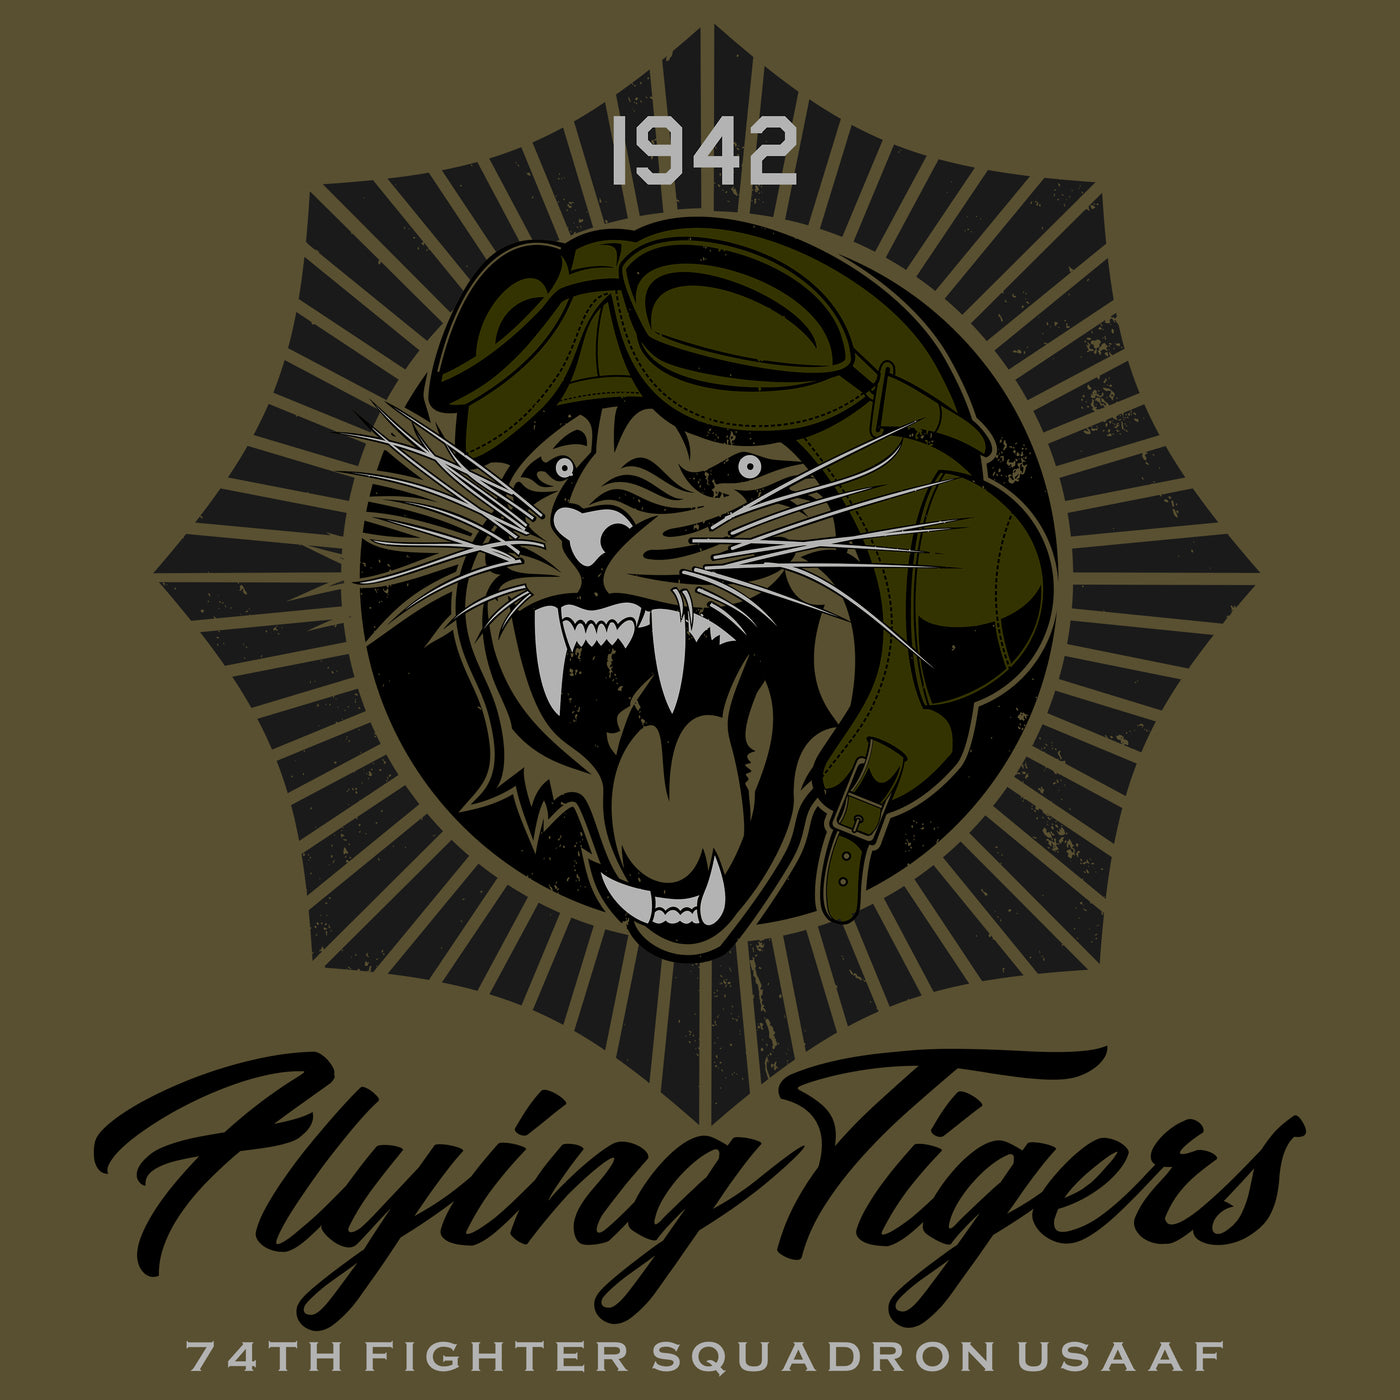 1942-Flying Tigers Col.